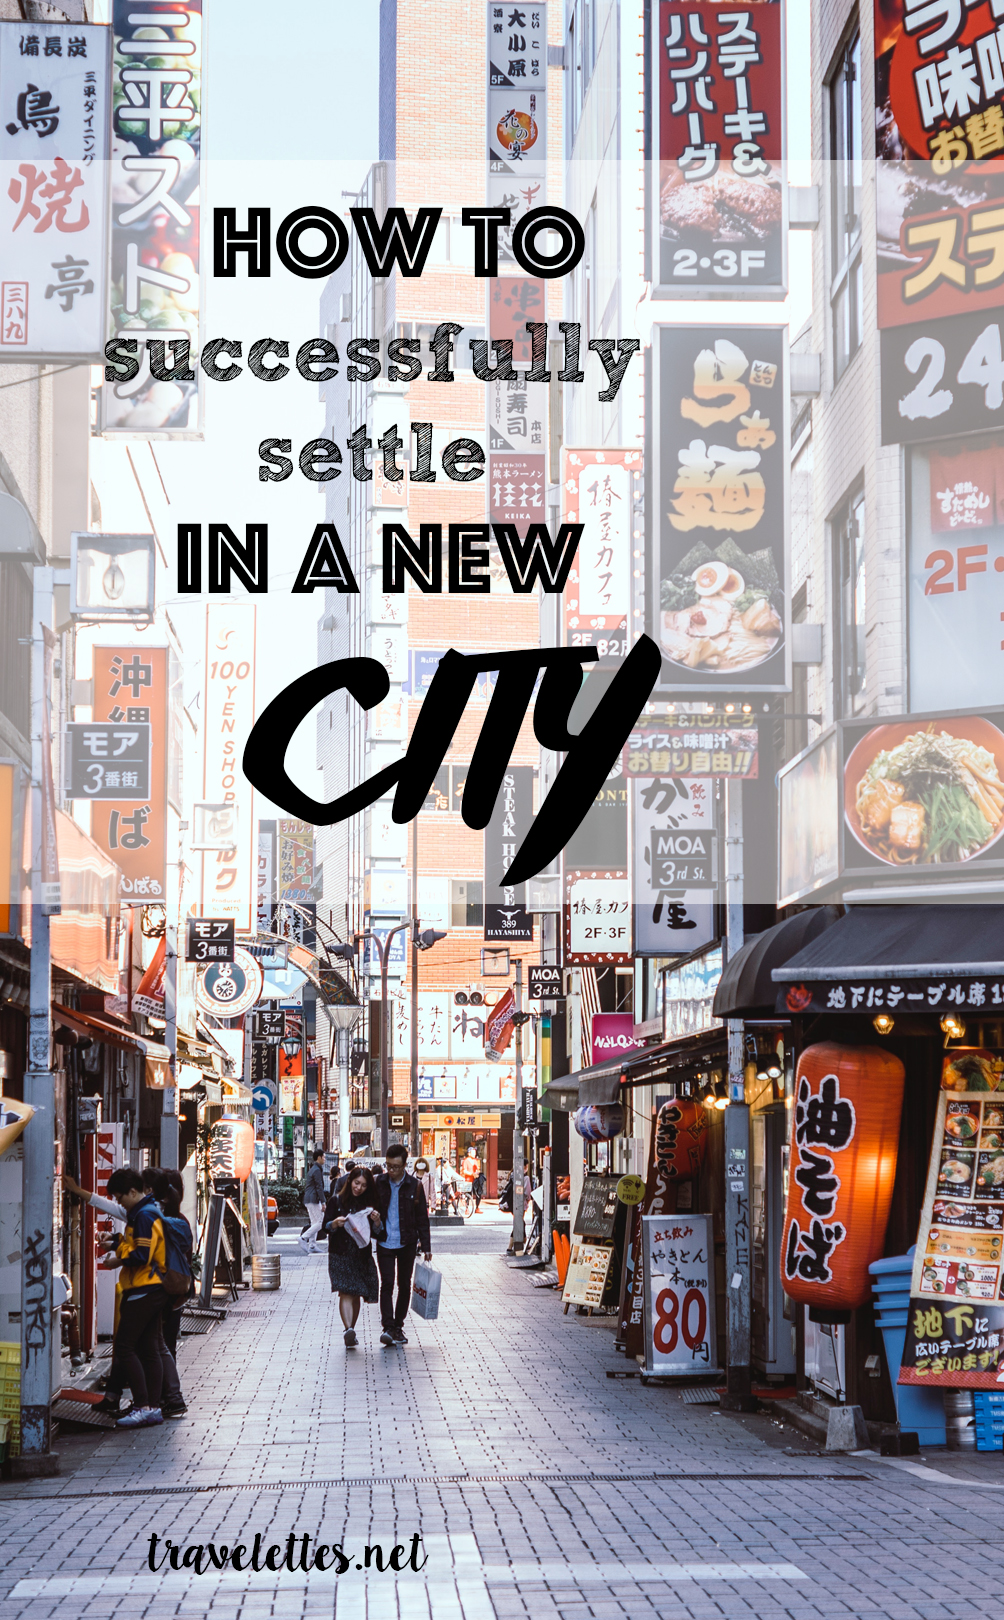 How to successfully settle in a new city